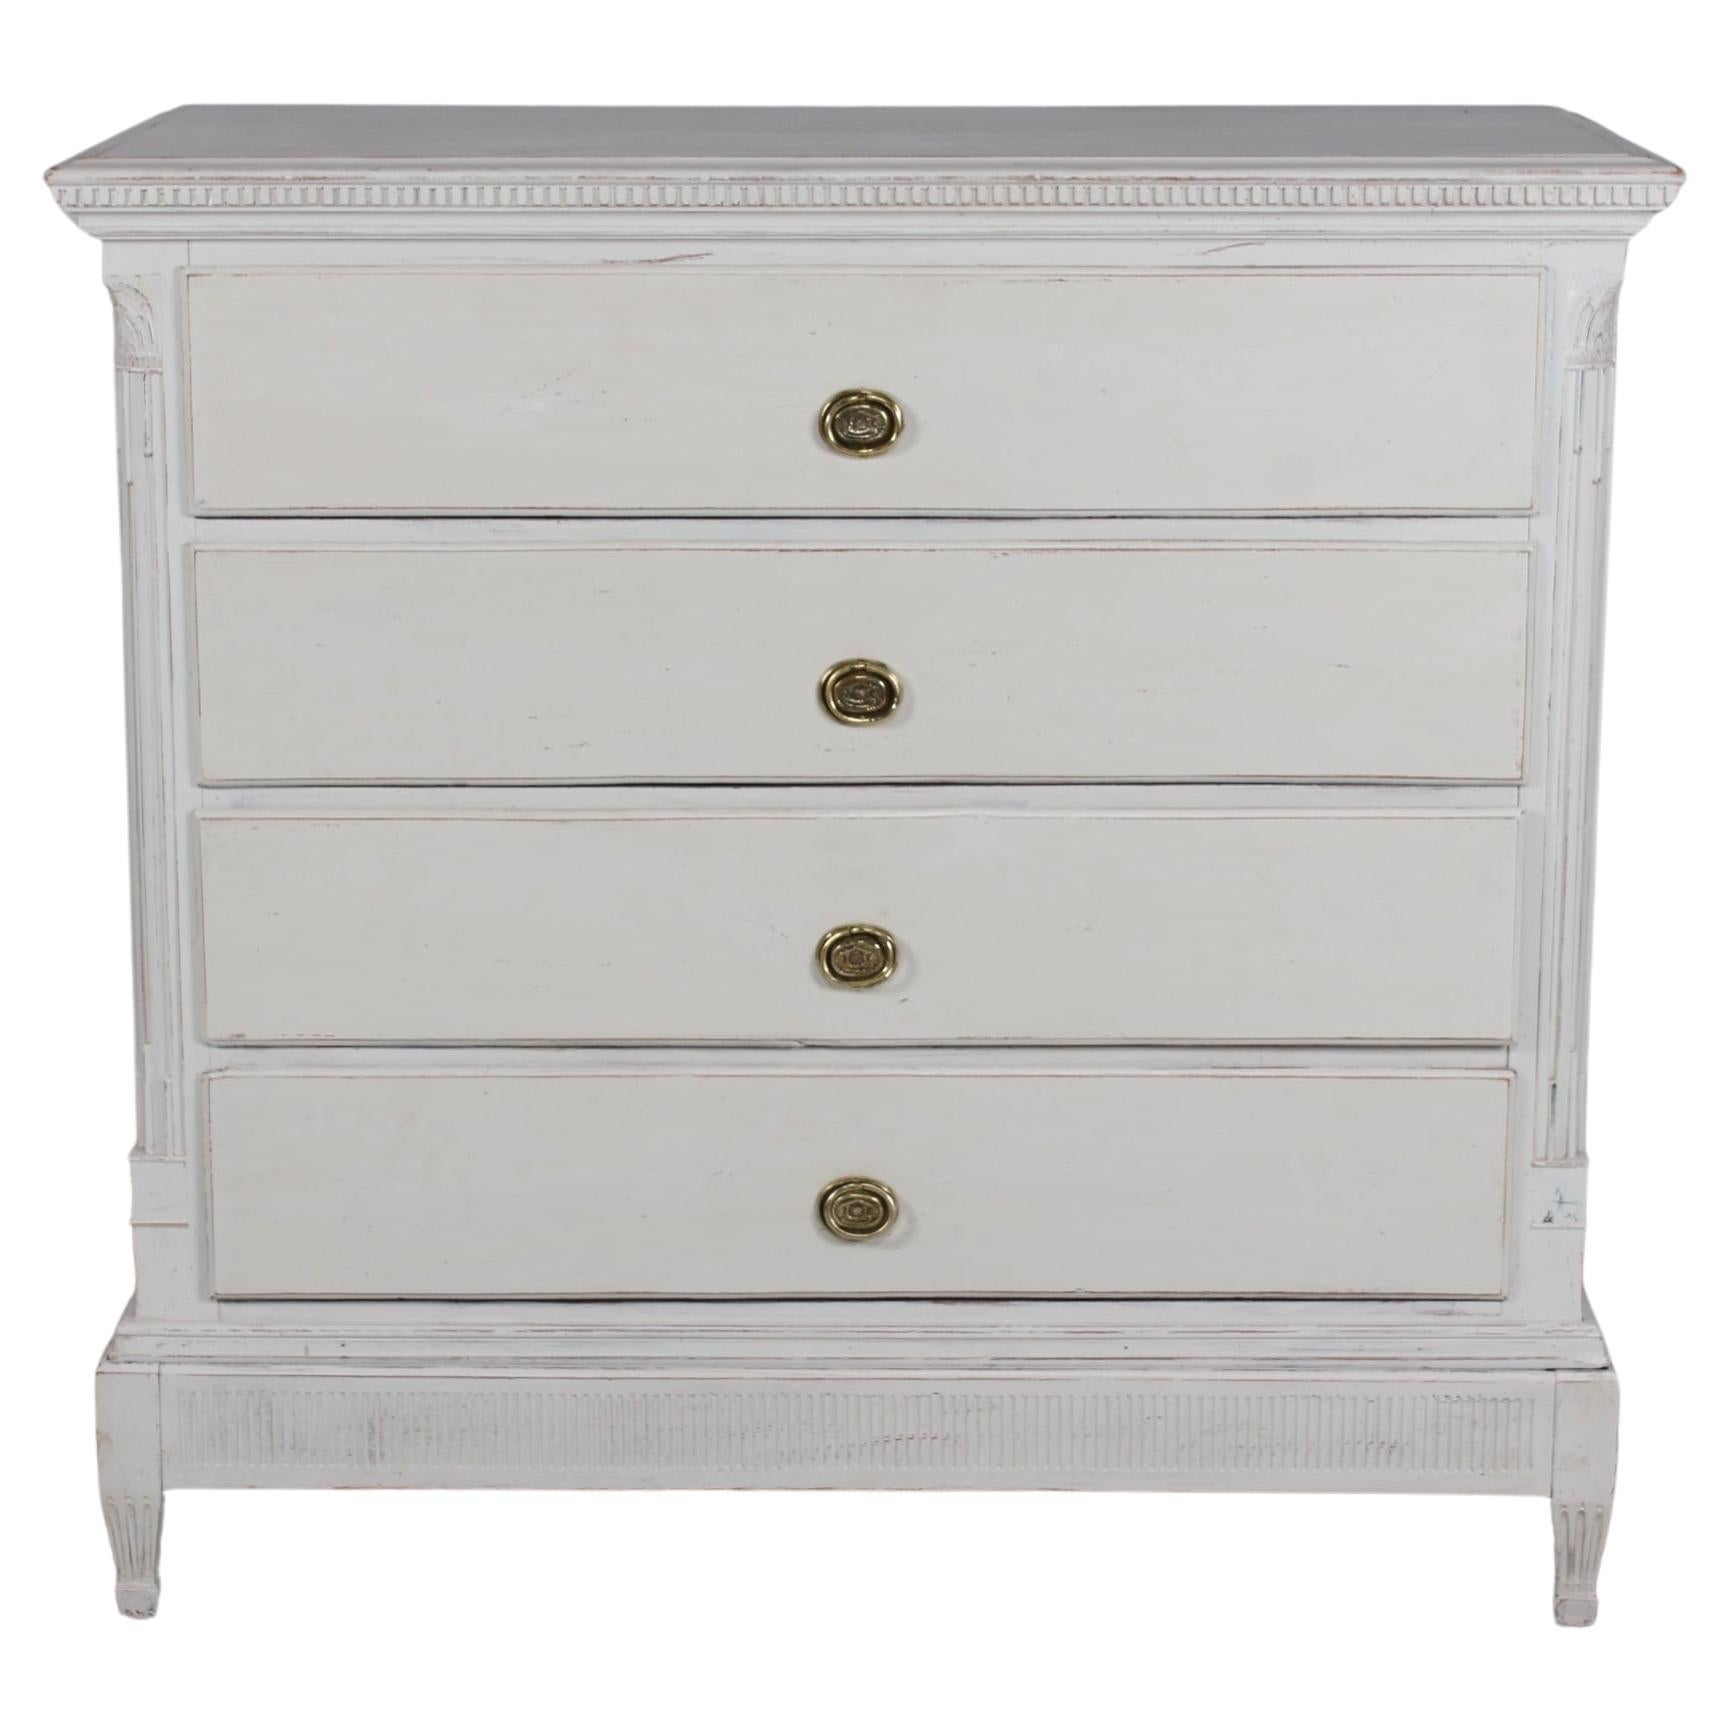 Danish Louis XVI Style Chest of Drawers with Gray Paint and Patina, 19th Century For Sale